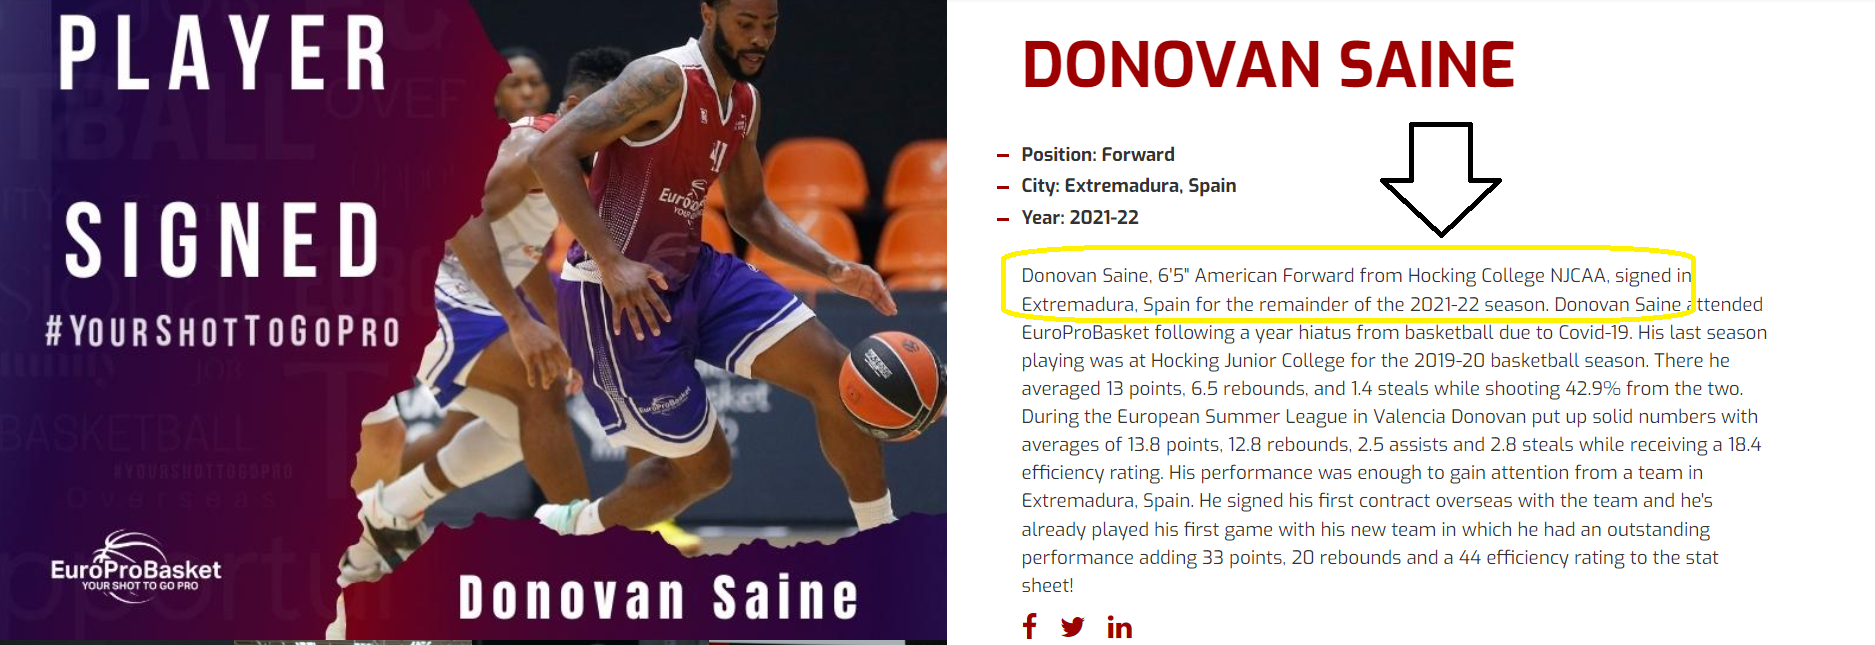 EuroProBasket provides overseas basketball tryouts for players looking to play professionally.